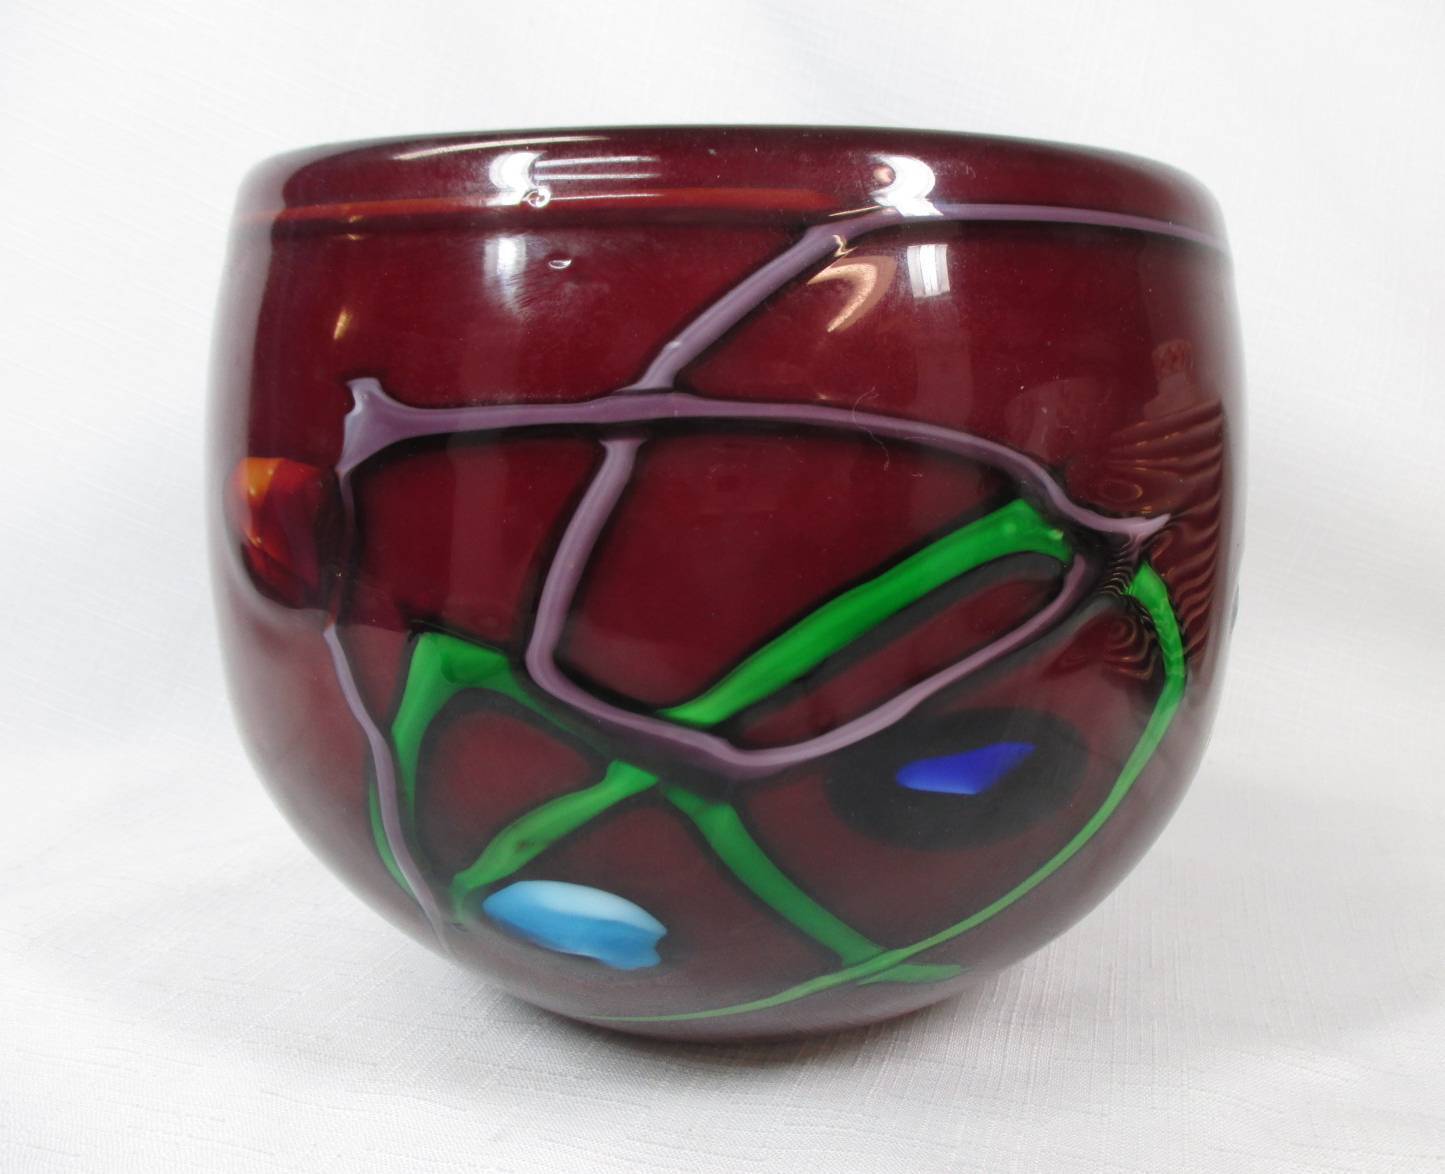 FANTASTIC MURANO RED BOWL WITH CANE CUTS AND GLASS DESIGNS ON SIDES